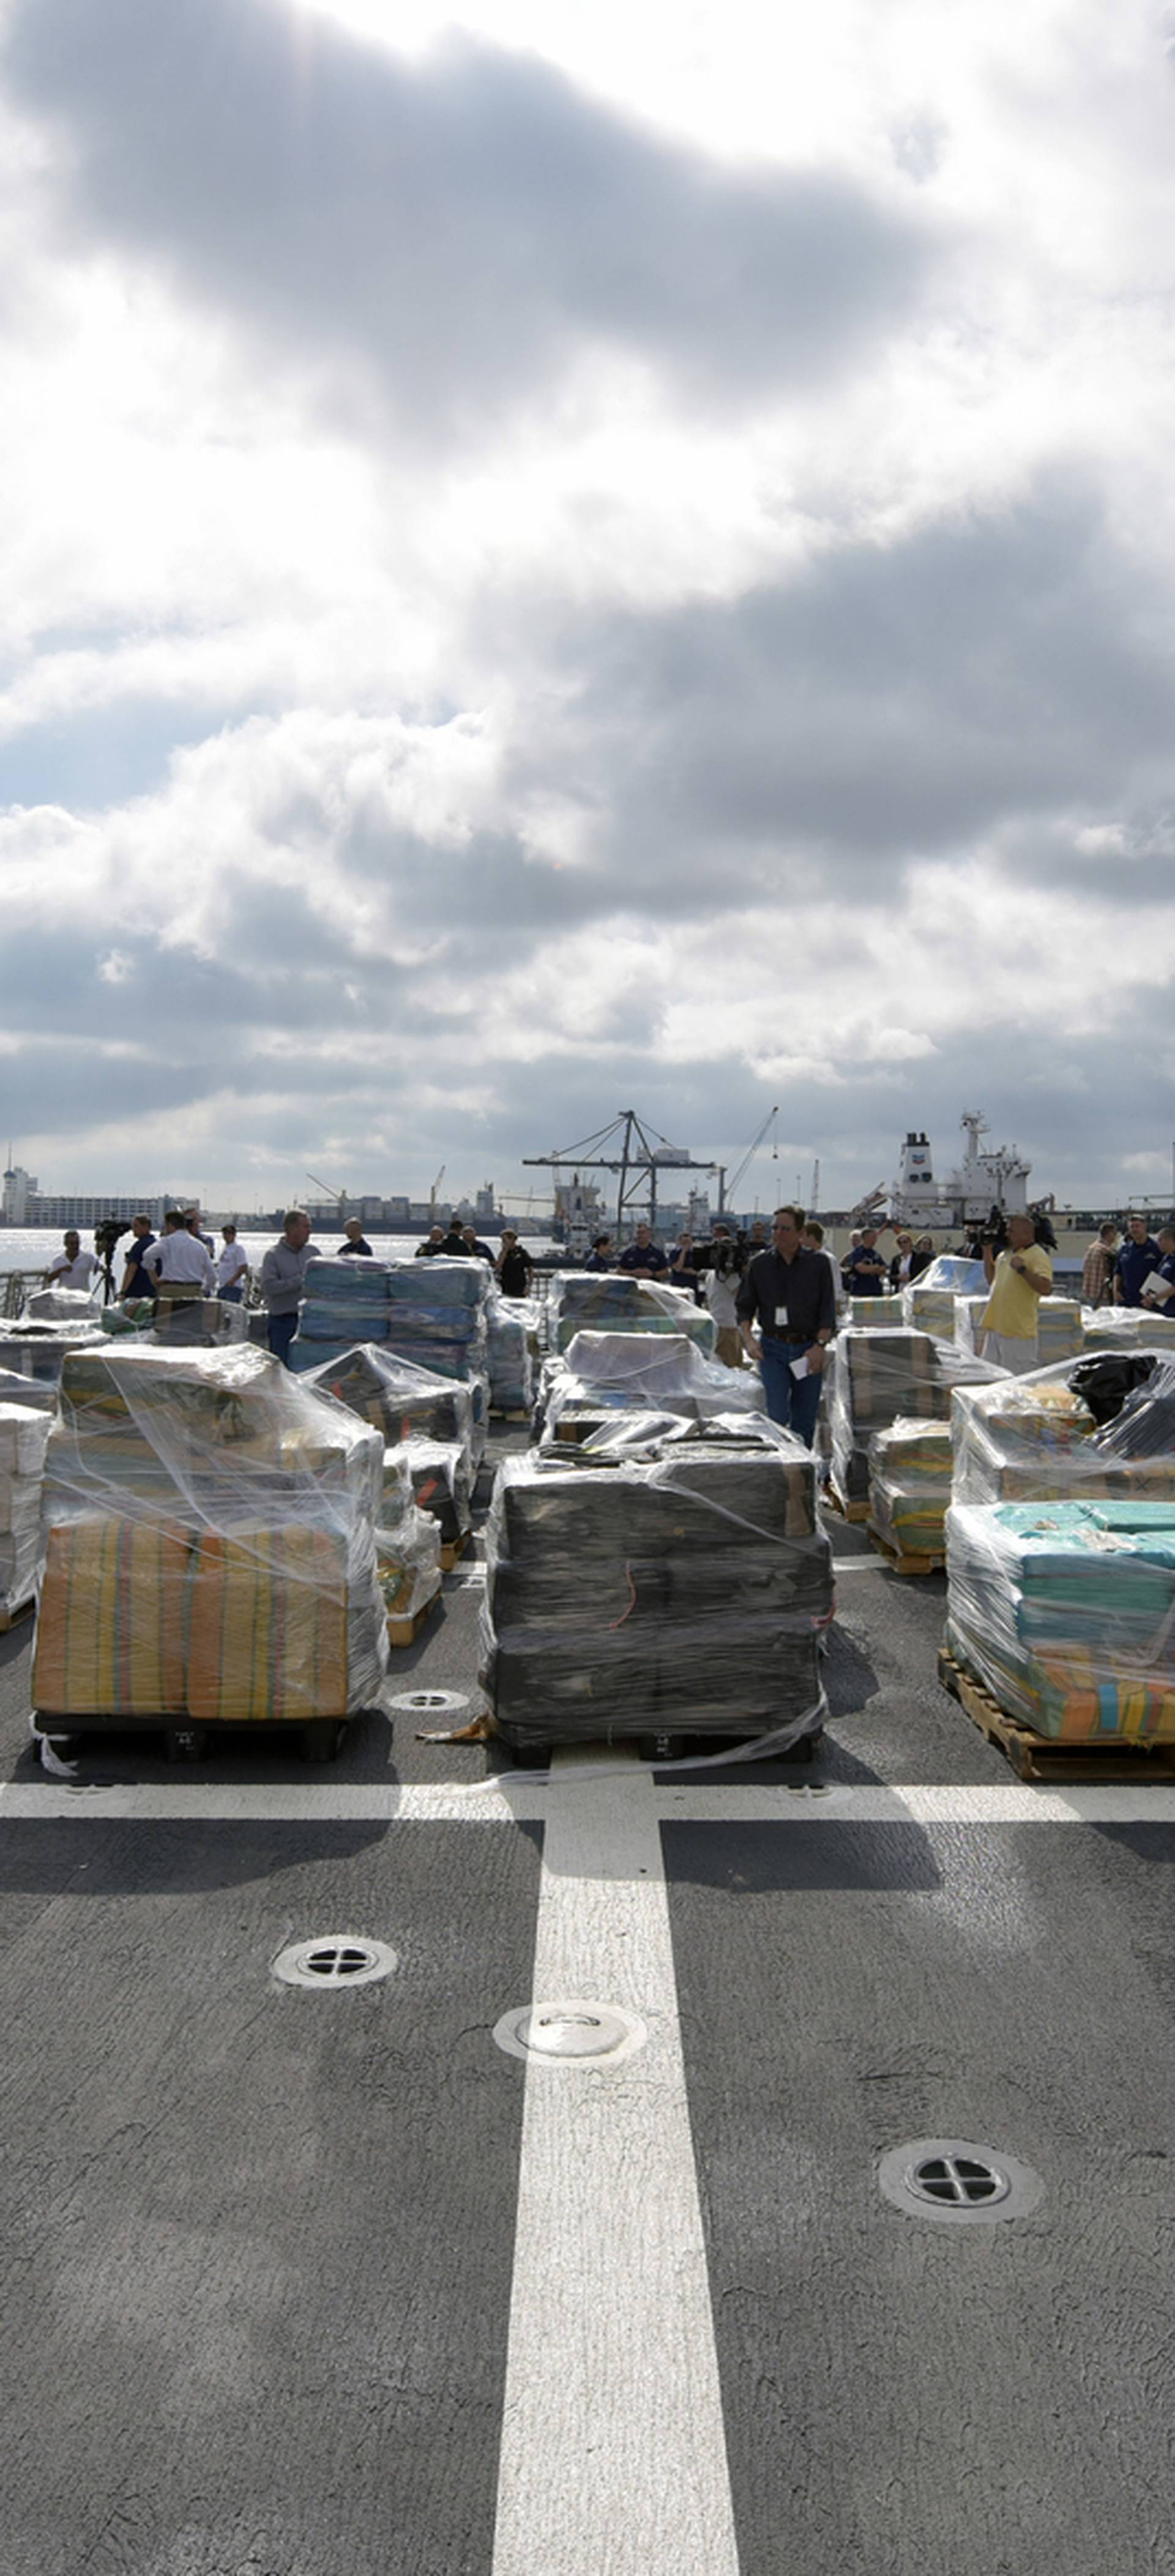 A view of 26.5 tons of cocaine aboard Coast Guard Cutter Hamilton